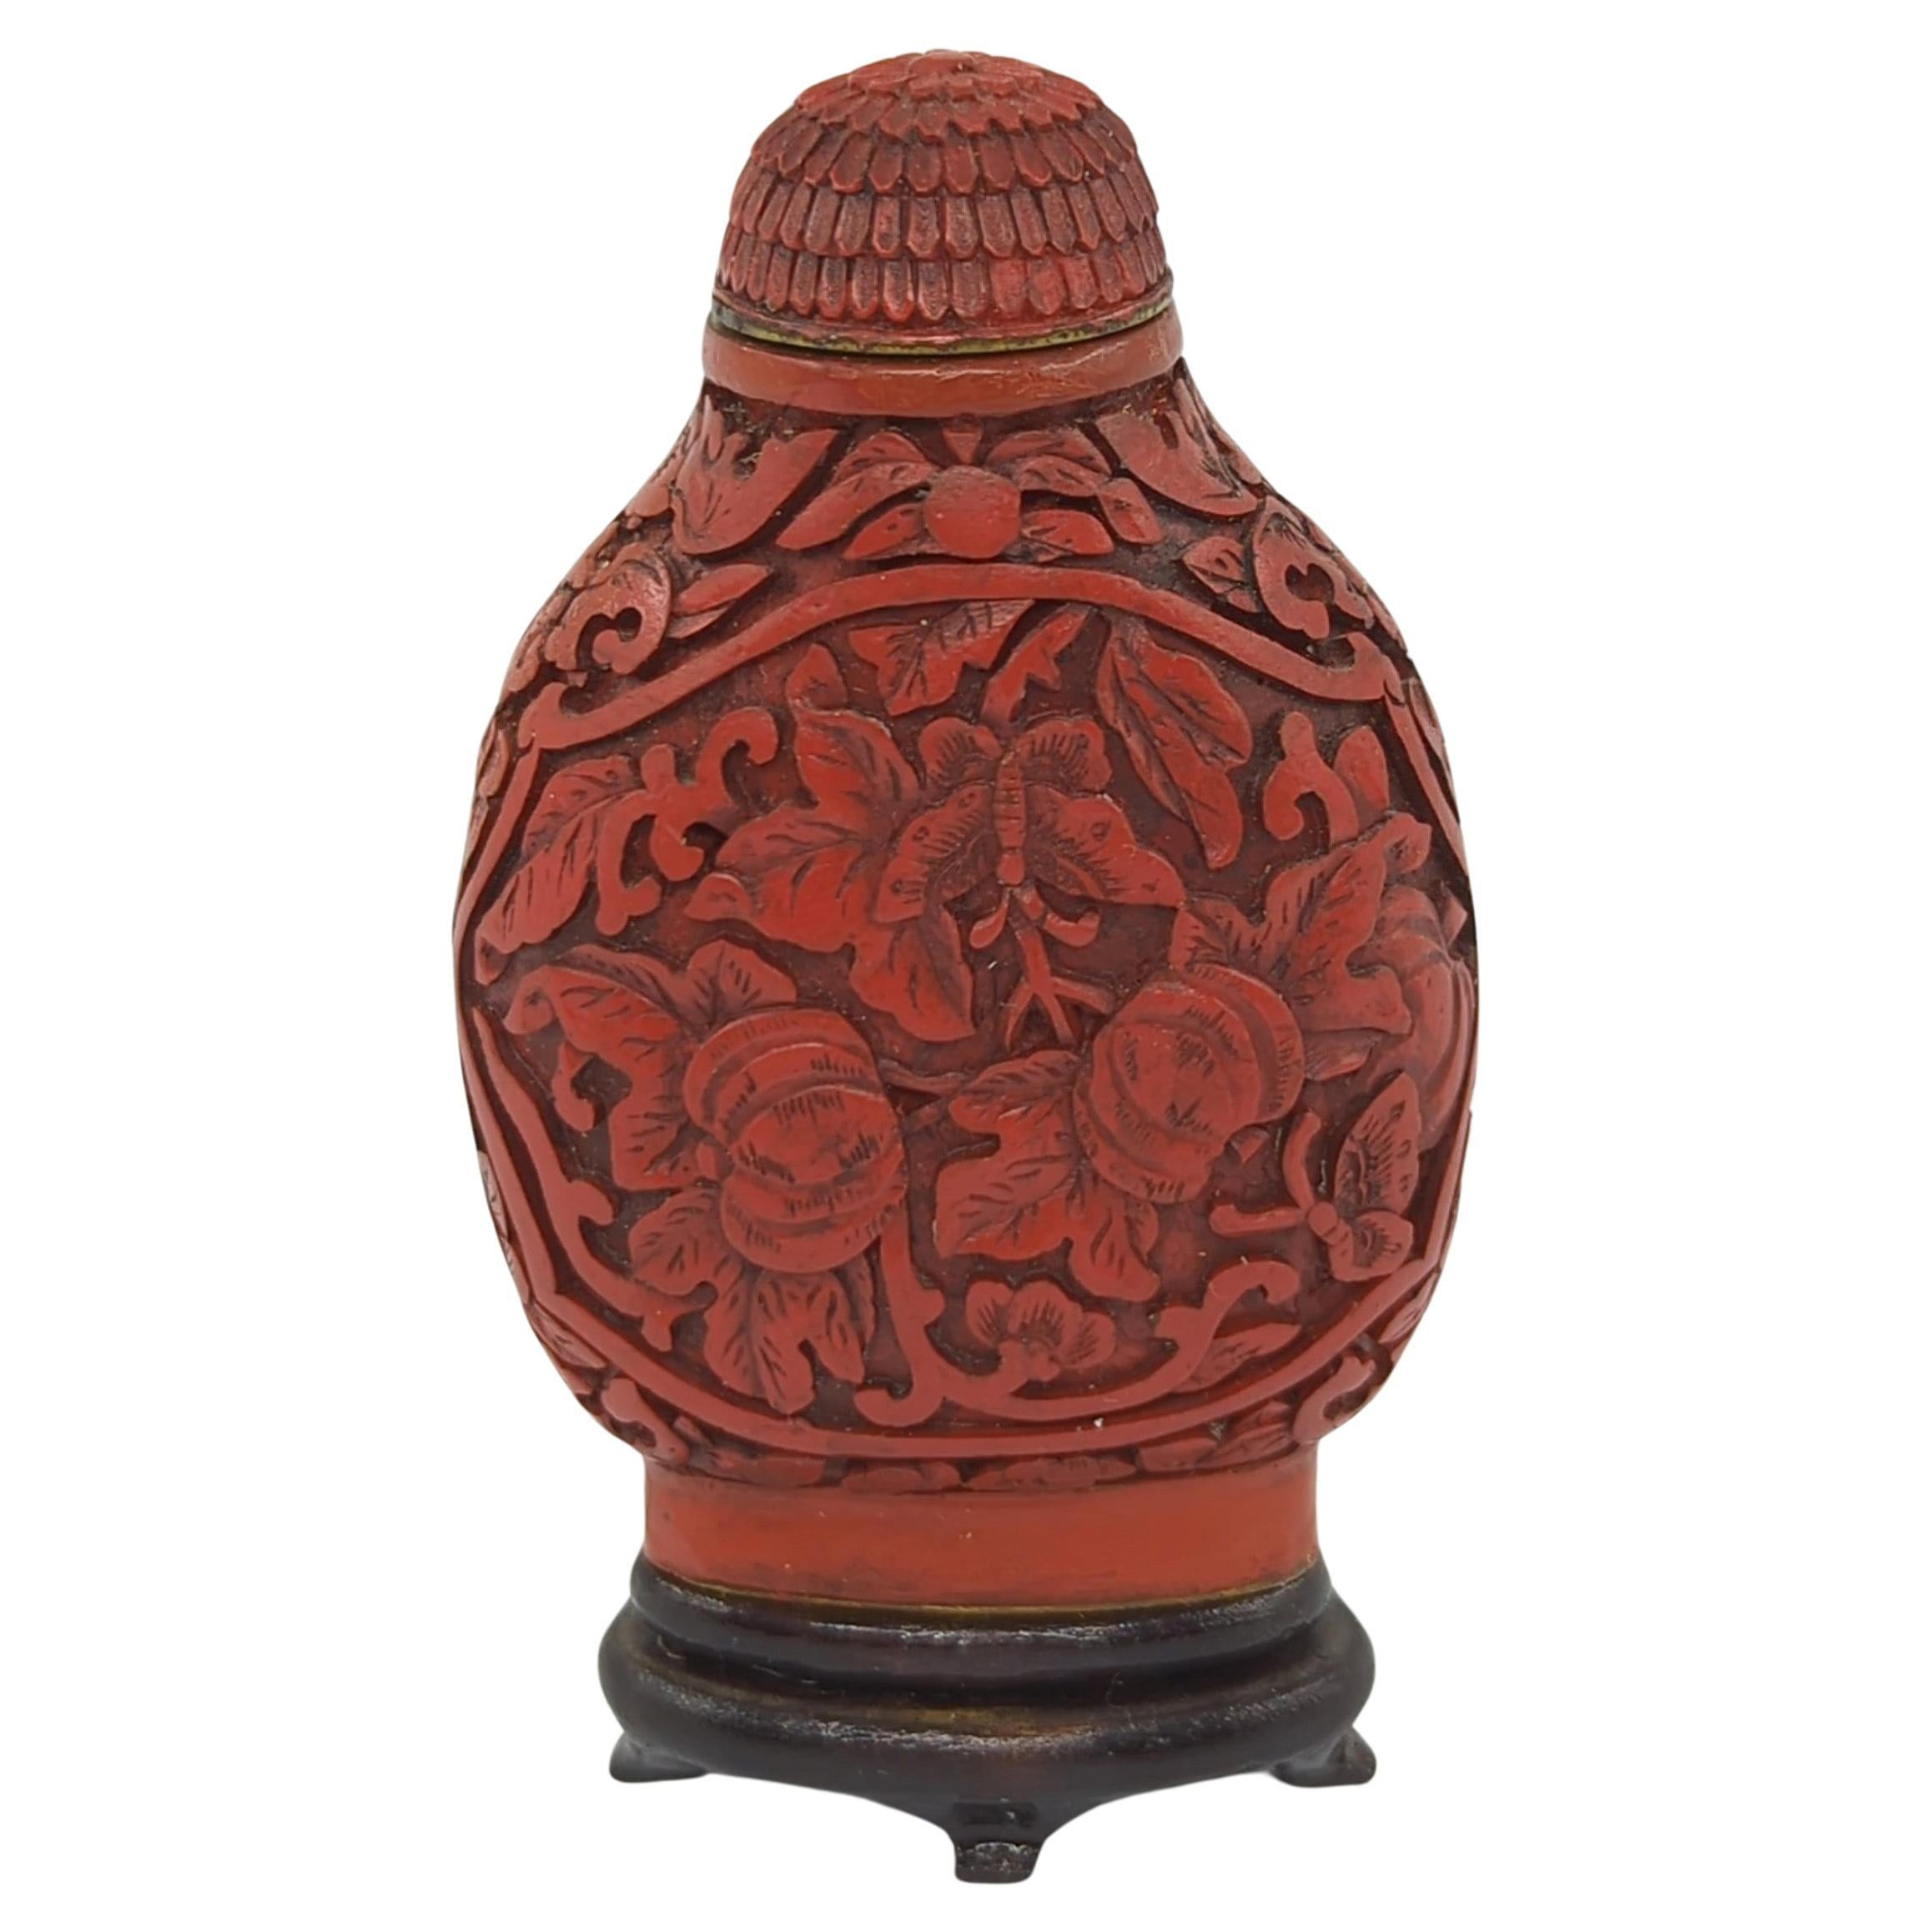 Antique Chinese red cinnabar lacquer snuff bottle, finely carved with melons, butterflies and bats, matching cinnabar stopper and 2 character Daoguang mark to base, comes with a hardwood stand

19c Qing Dynasty